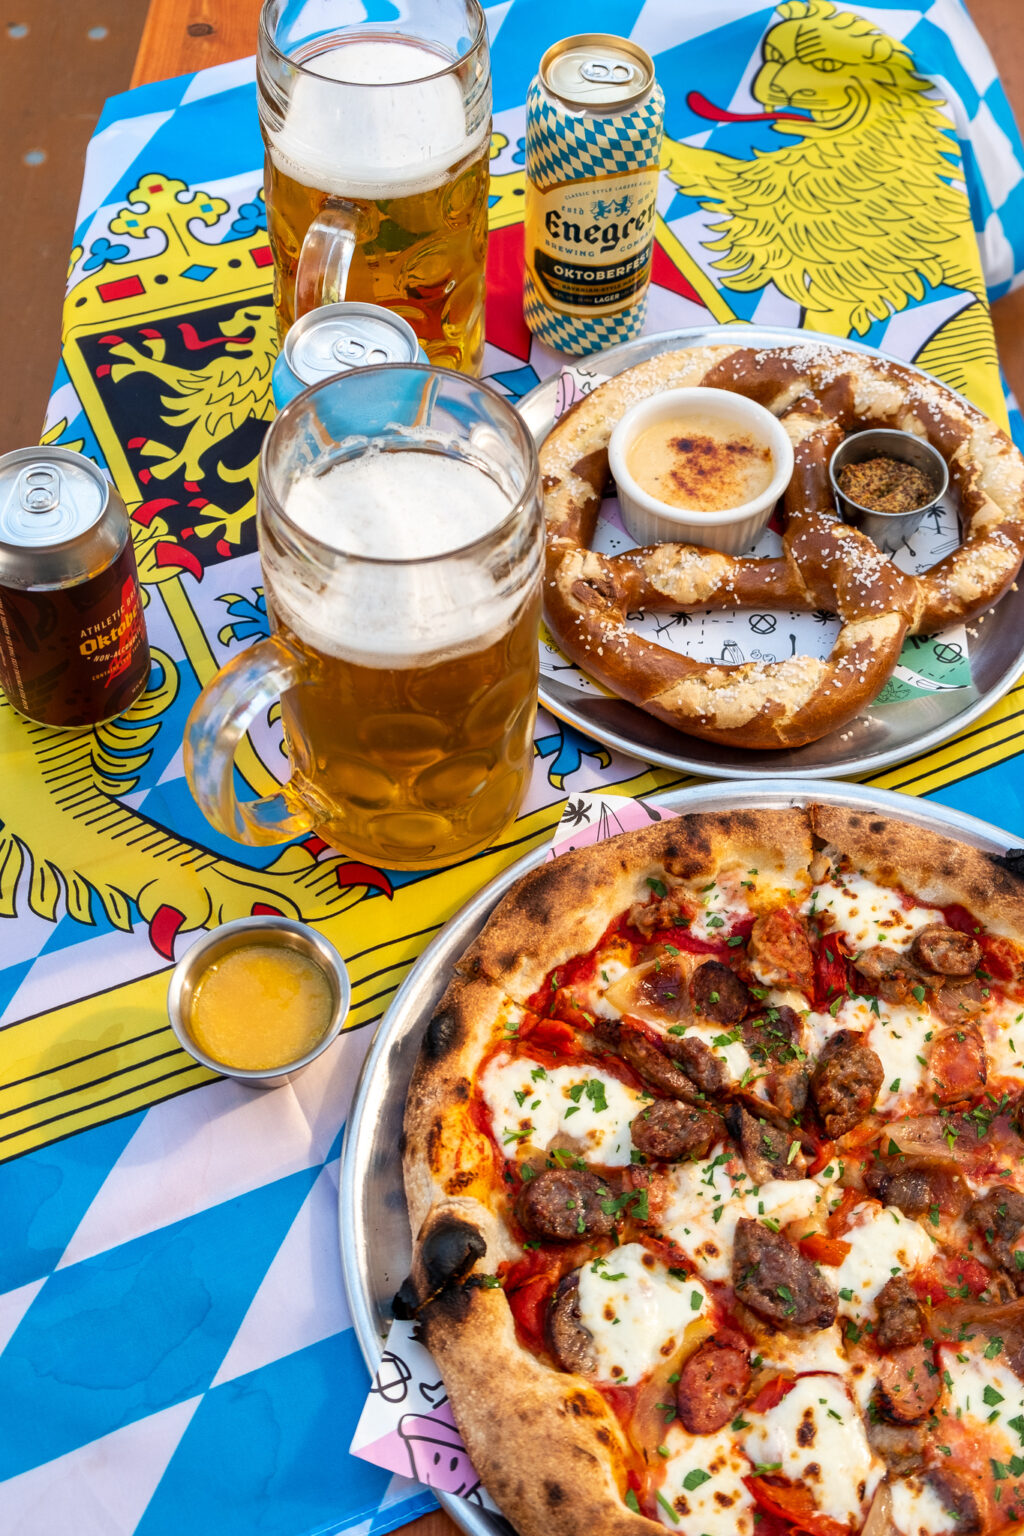 Pitfire Pizza’s flagship location in the NoHo Arts District is turning their outdoor patio into a full Oktoberfest Beer Garden, on the weekends from September 24 – October 9.